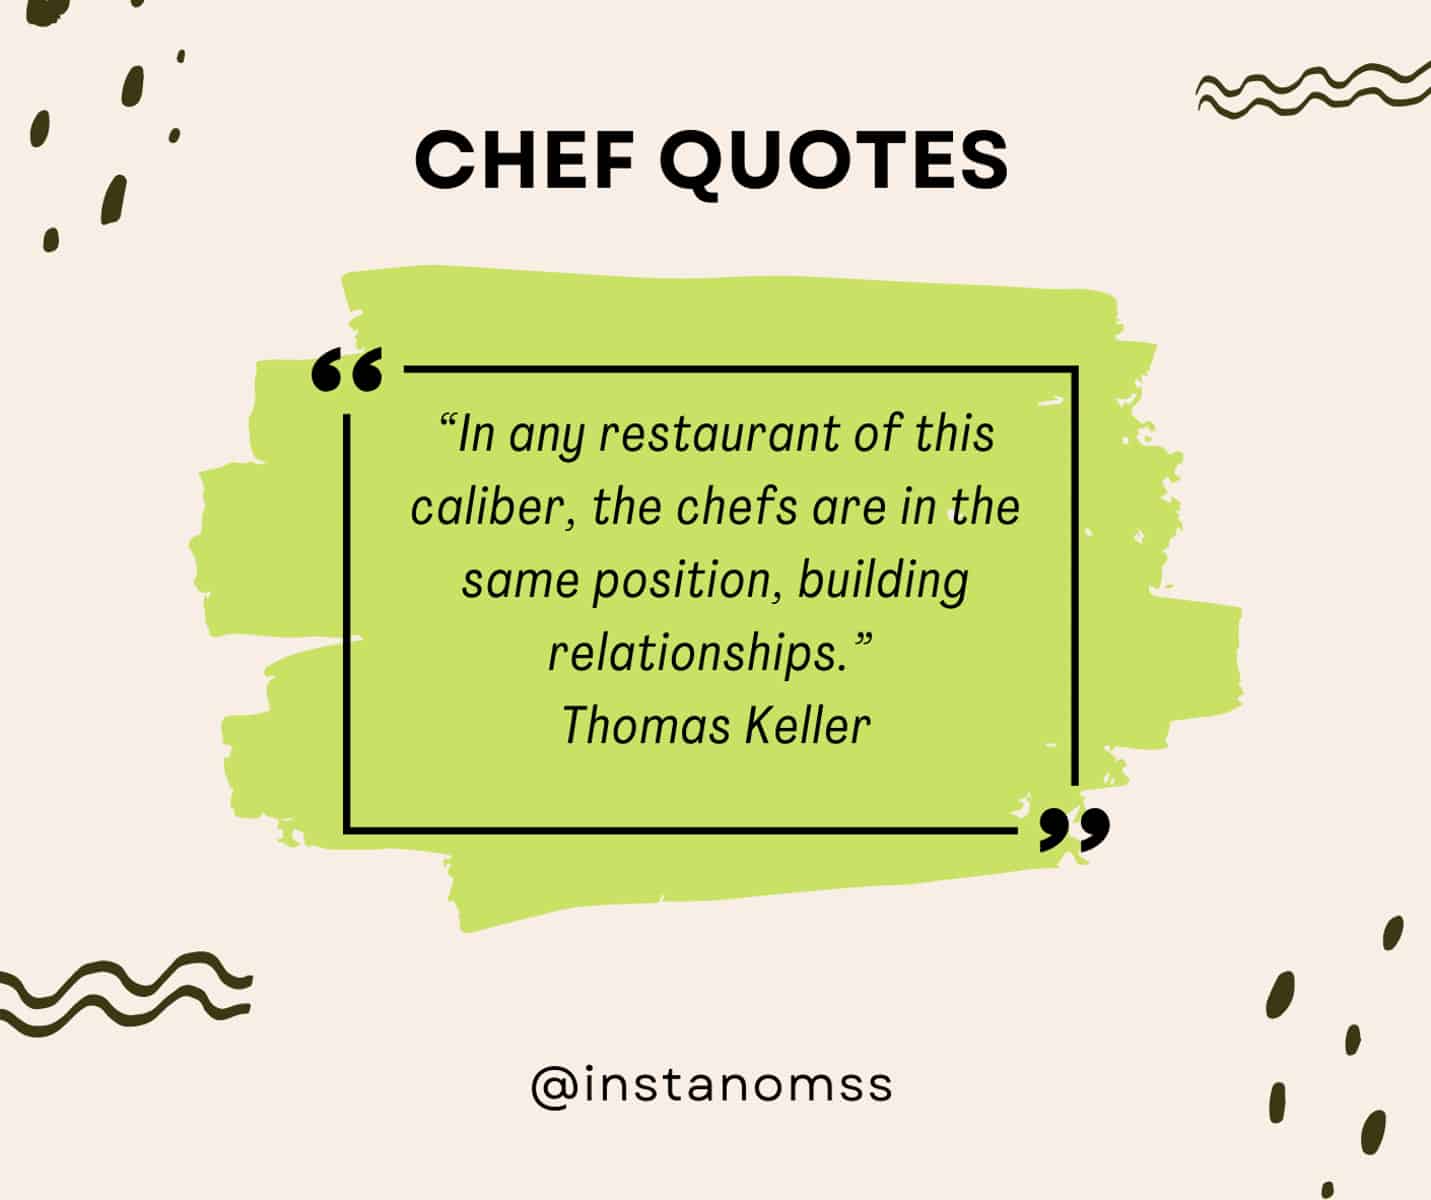 “In any restaurant of this caliber, the chefs are in the same position, building relationships.” Thomas Keller